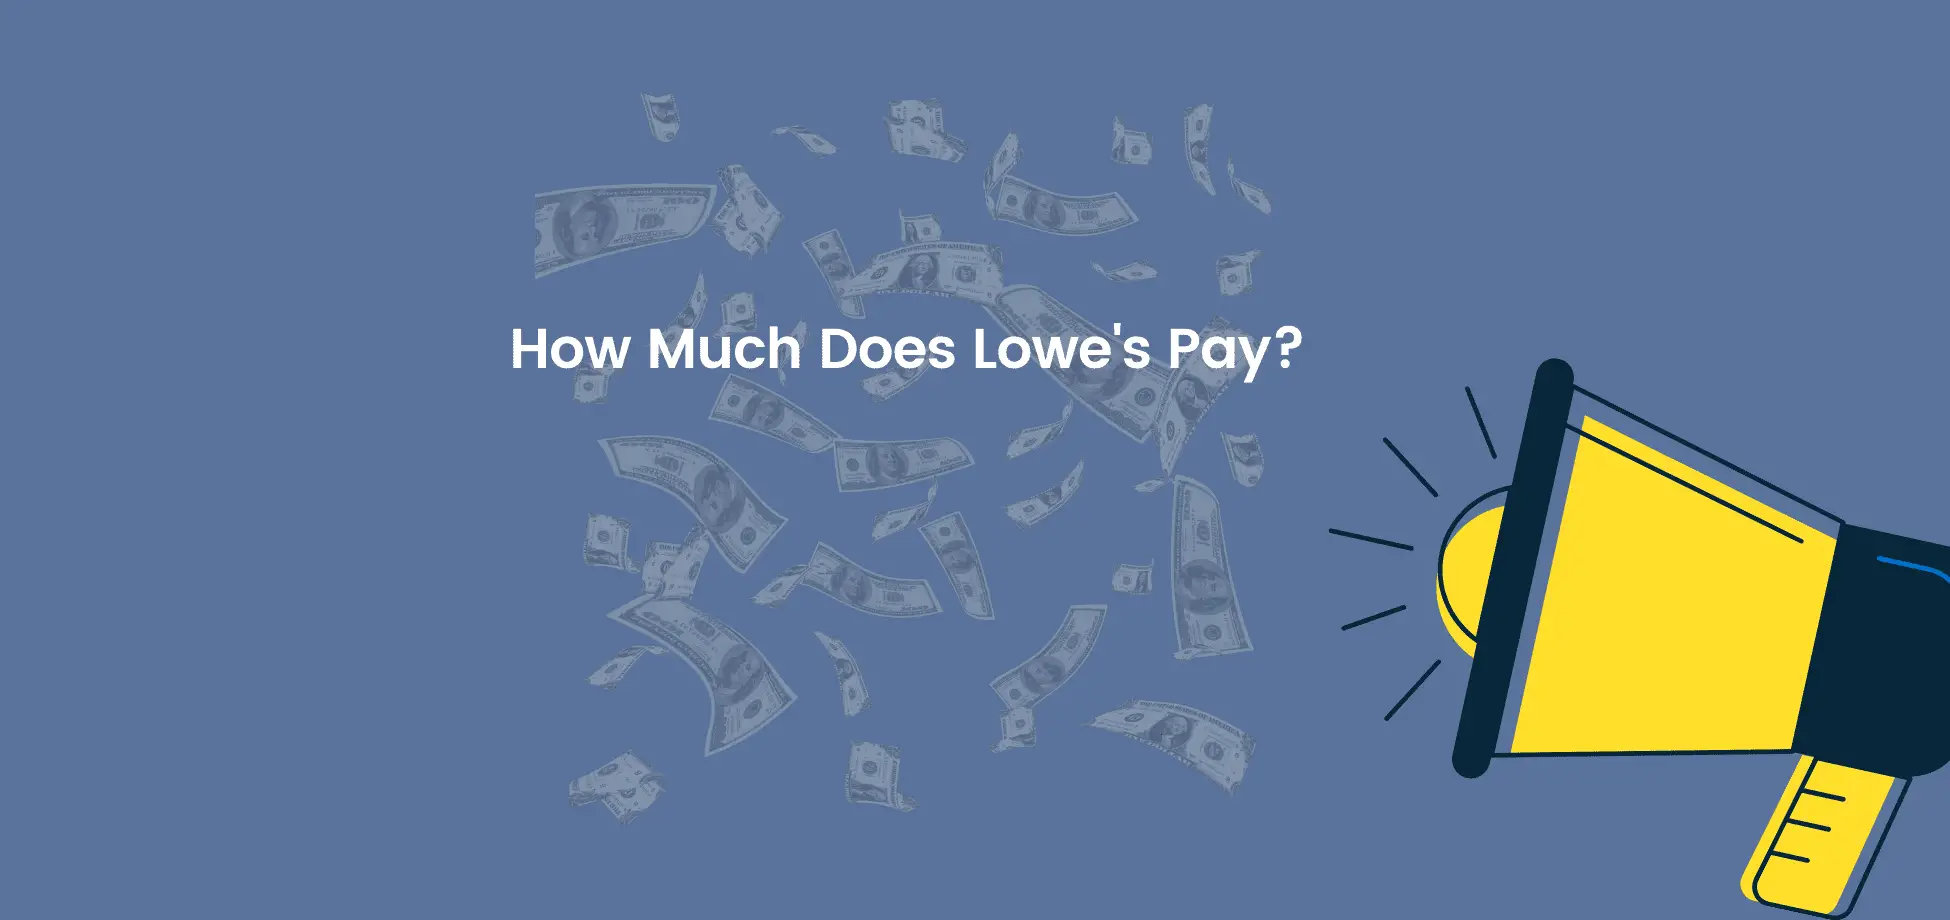 The starting pay for Lowe's is consistent with Home Depot's starting hourly wage.